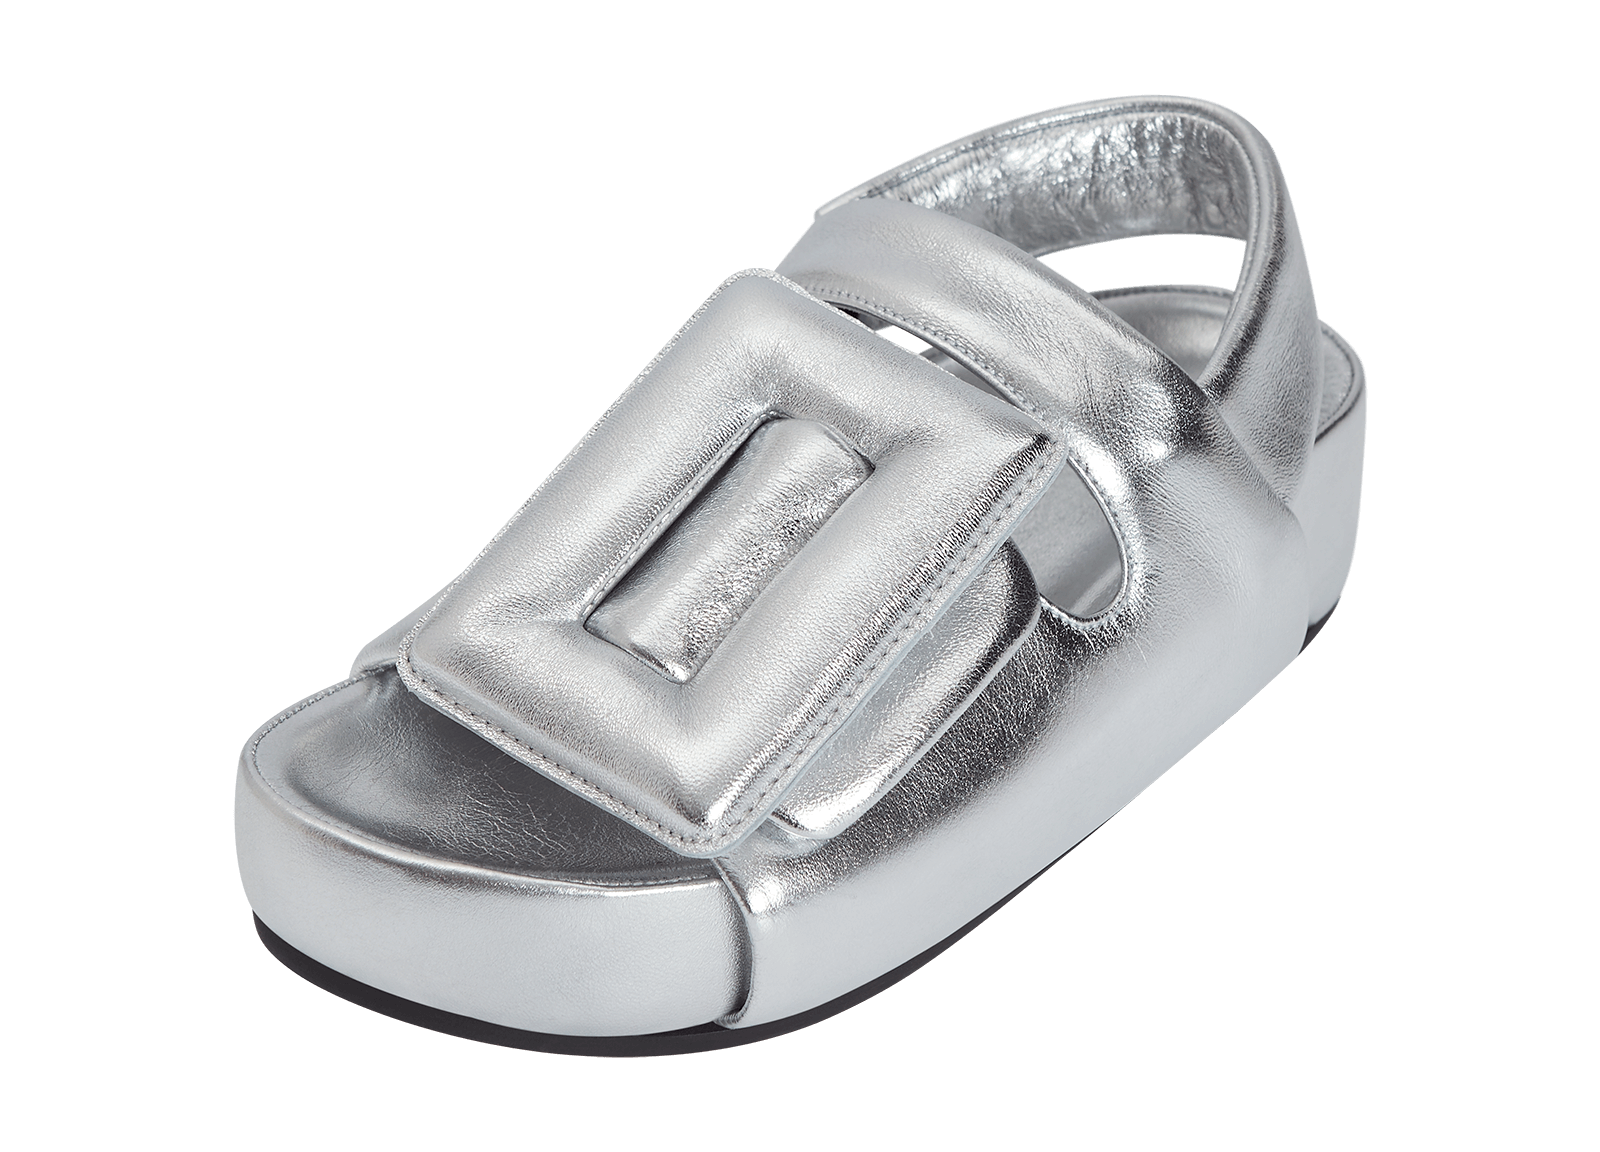 Metallic silver sandal with low ankle strap. Oversized puffy buckle and belt. Lambskin upper and insole.